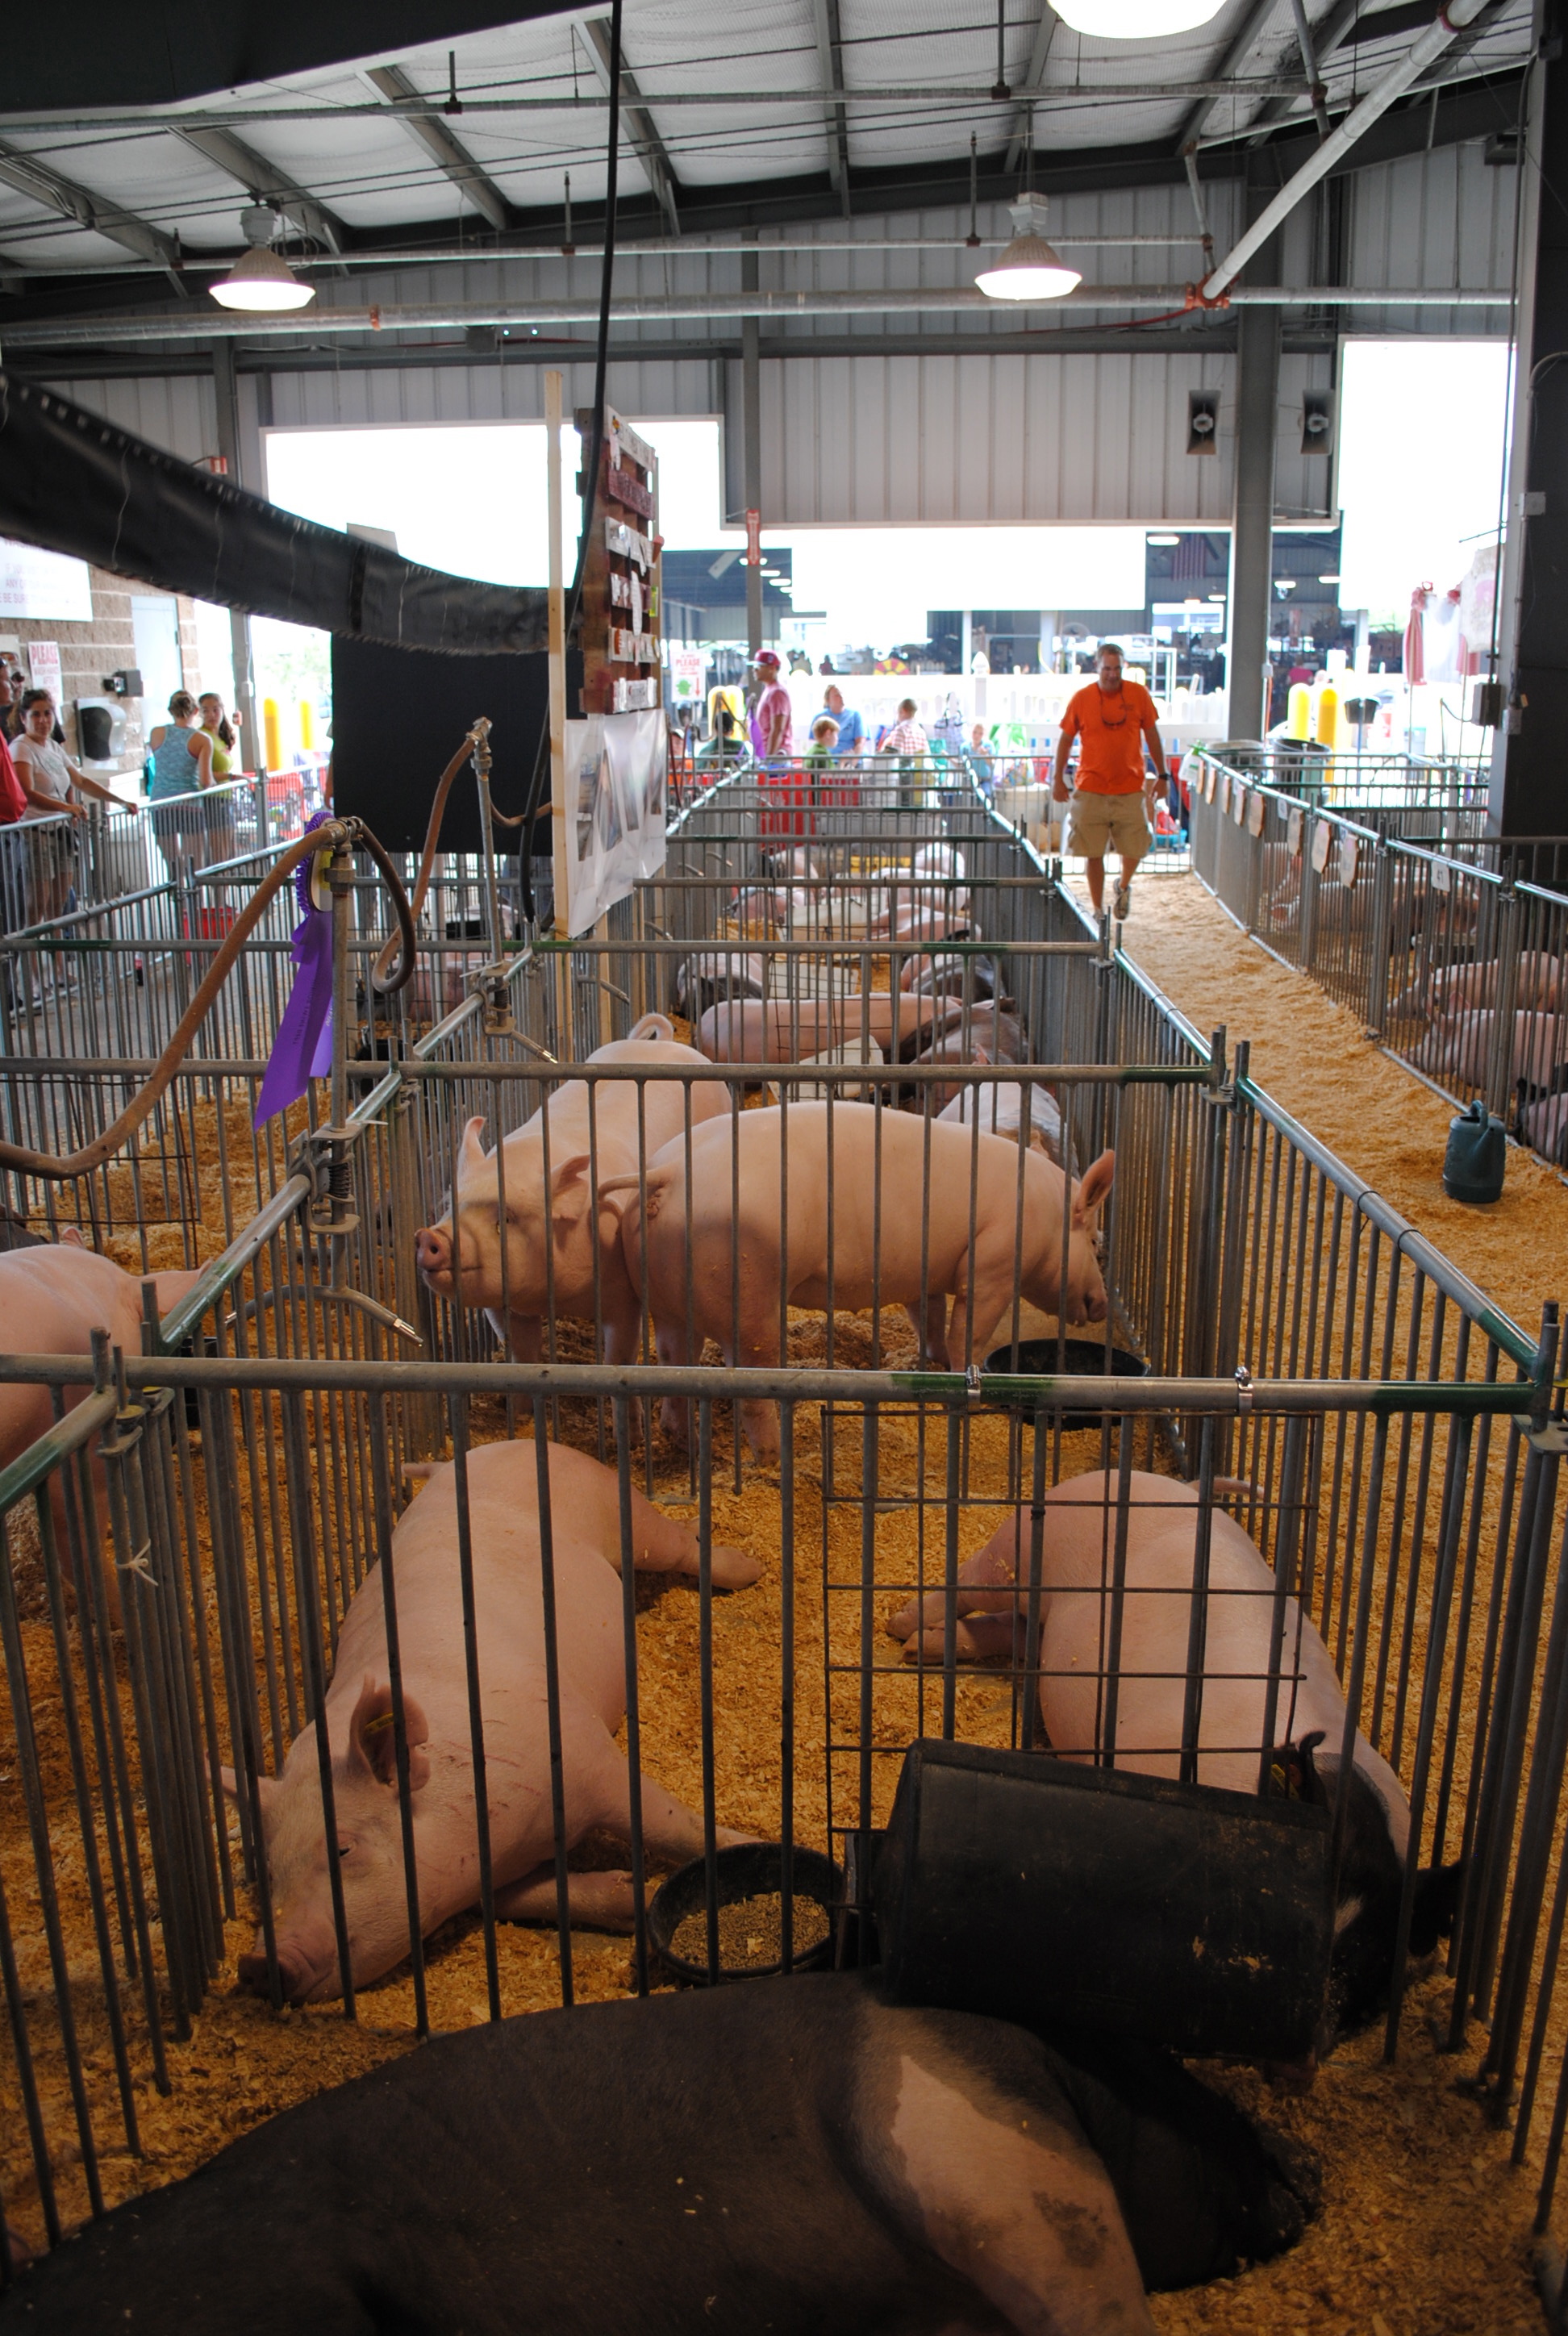 A series of swine pens at a state fair.